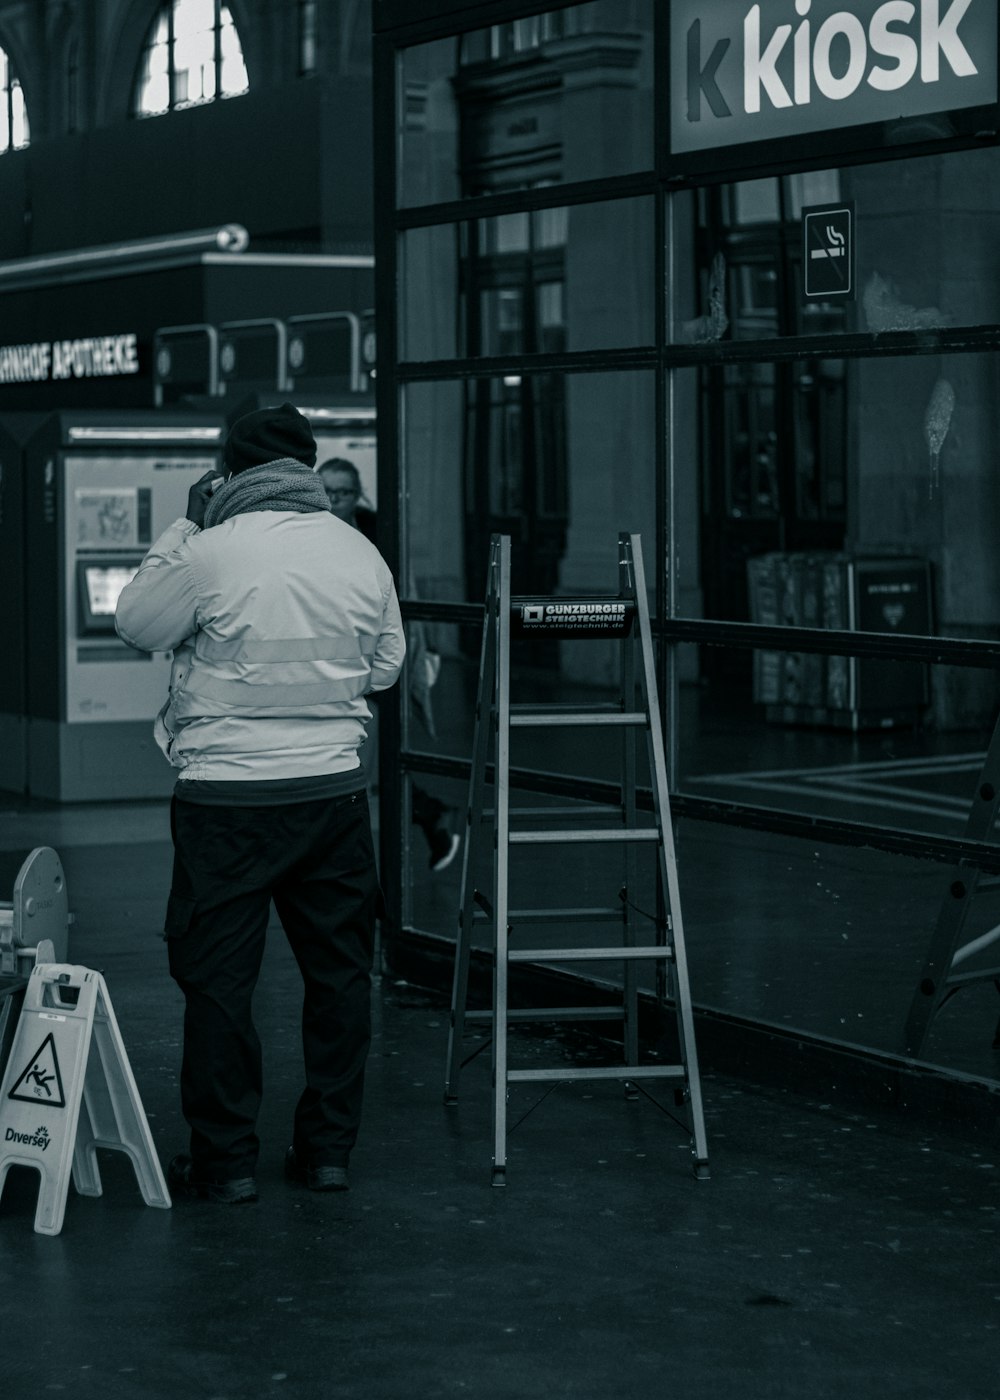 a man standing in front of a kiosk talking on a phone